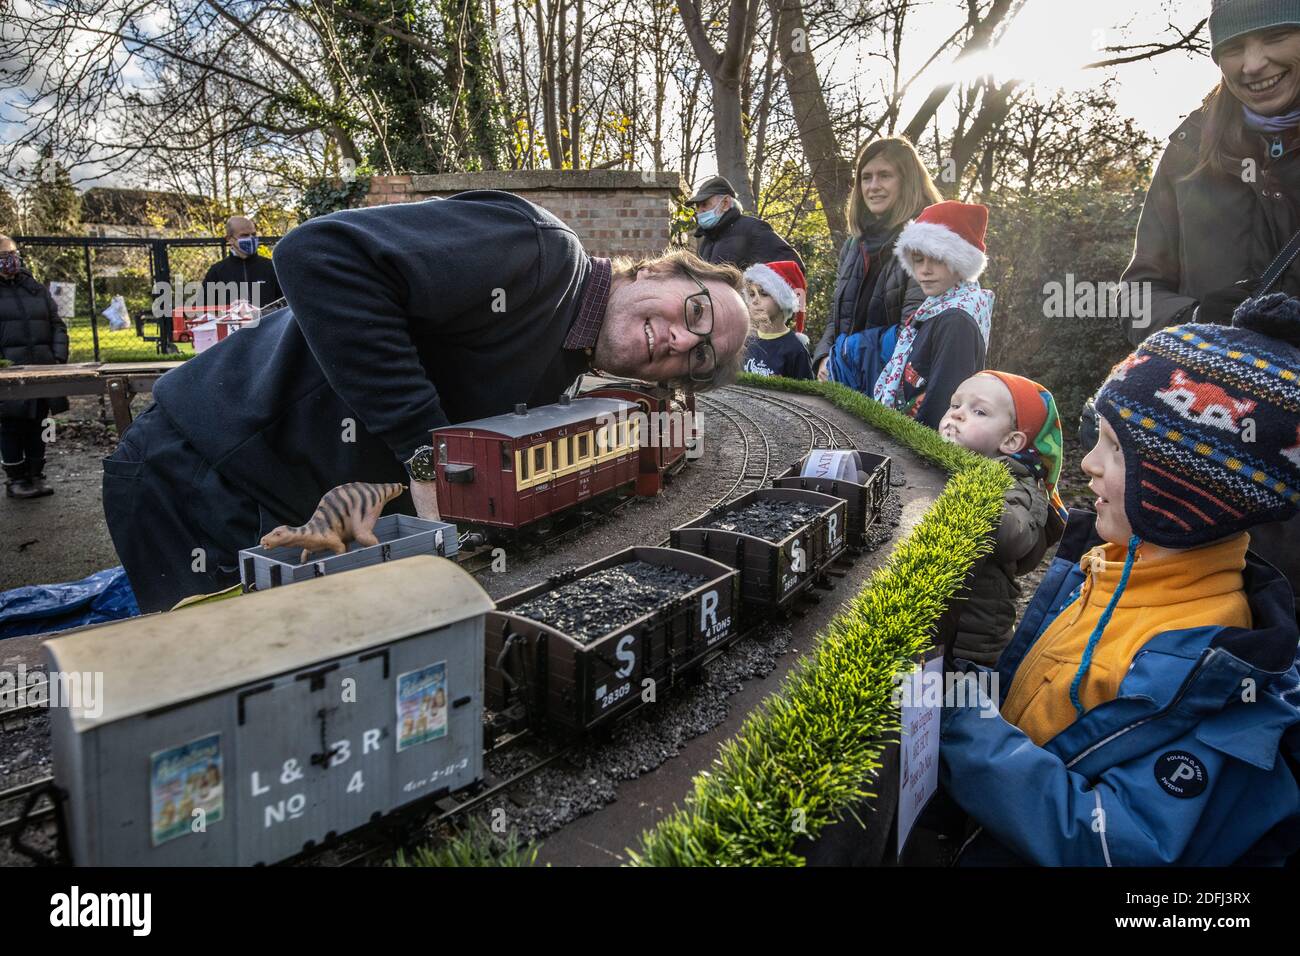 Southwest London, UK. 5th Dec 2020. Model Railway enthusiasts gather for festive train experience, Southwest London, UK 05th December 2020 People were able to go out and enjoy watching steam model railway locomotives on a bright and sunny winters day in Merton park, London, England, UK Credit: Clickpics/Alamy Live News Stock Photo